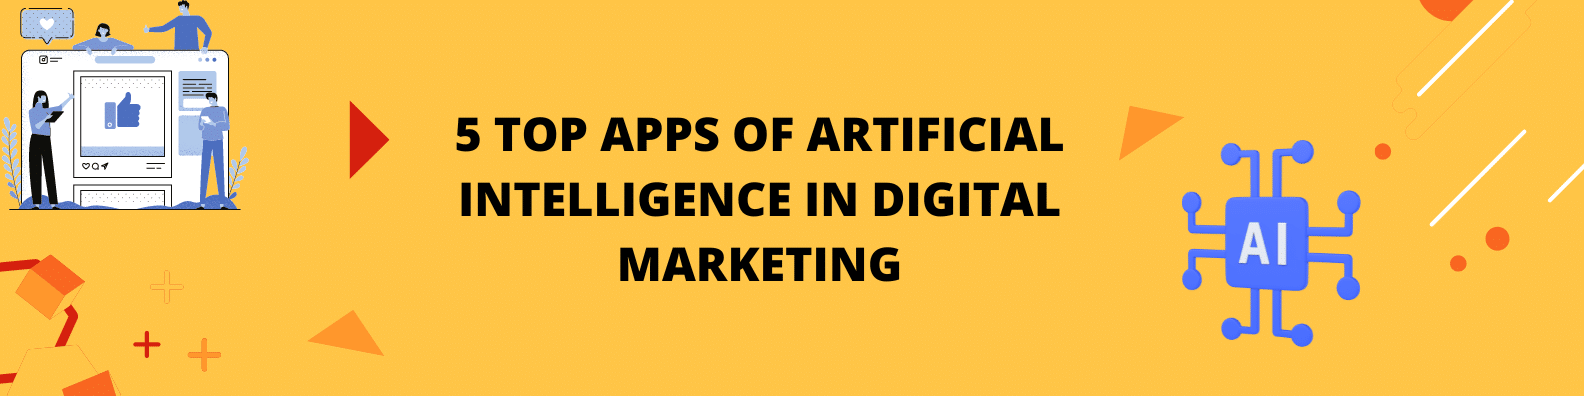 5 Top Apps of Artificial Intelligence in Digital Marketing